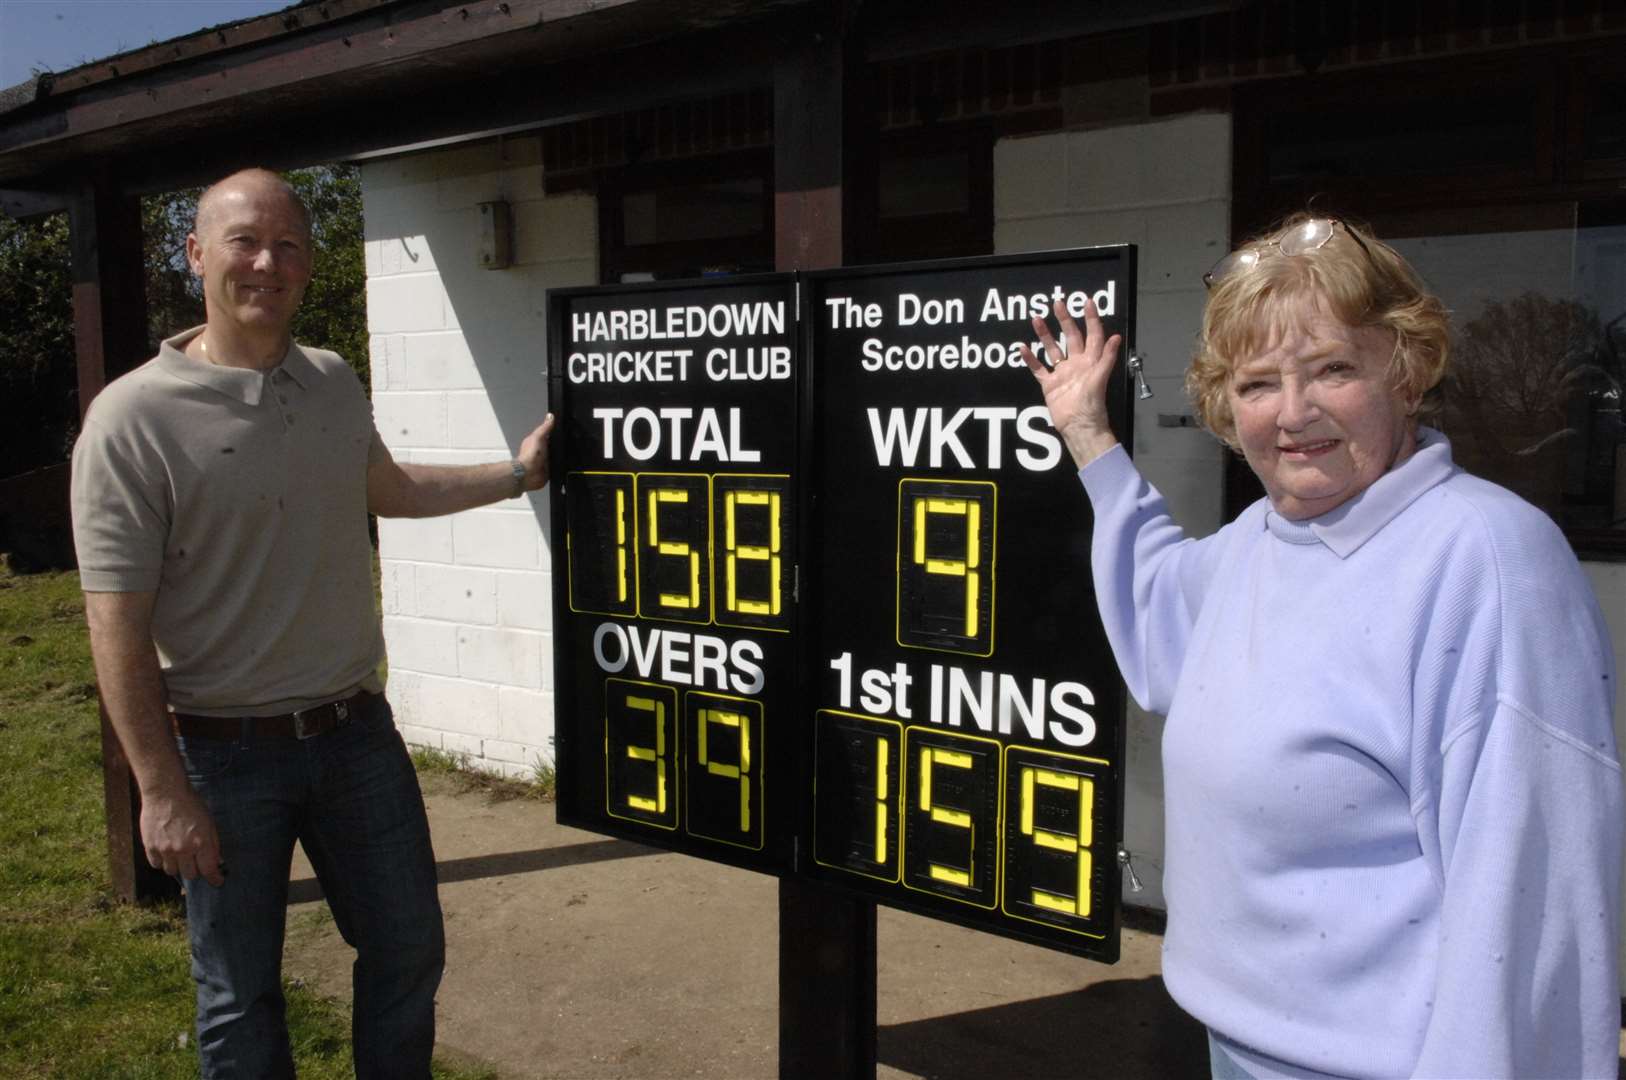 Former Kent and England cricketer Vince Wells with Margaret Ansted and the scoreboard in memory of Don Ansted at Harbledown Cricket Club, pictured in 2011. Picture: Chris Davey